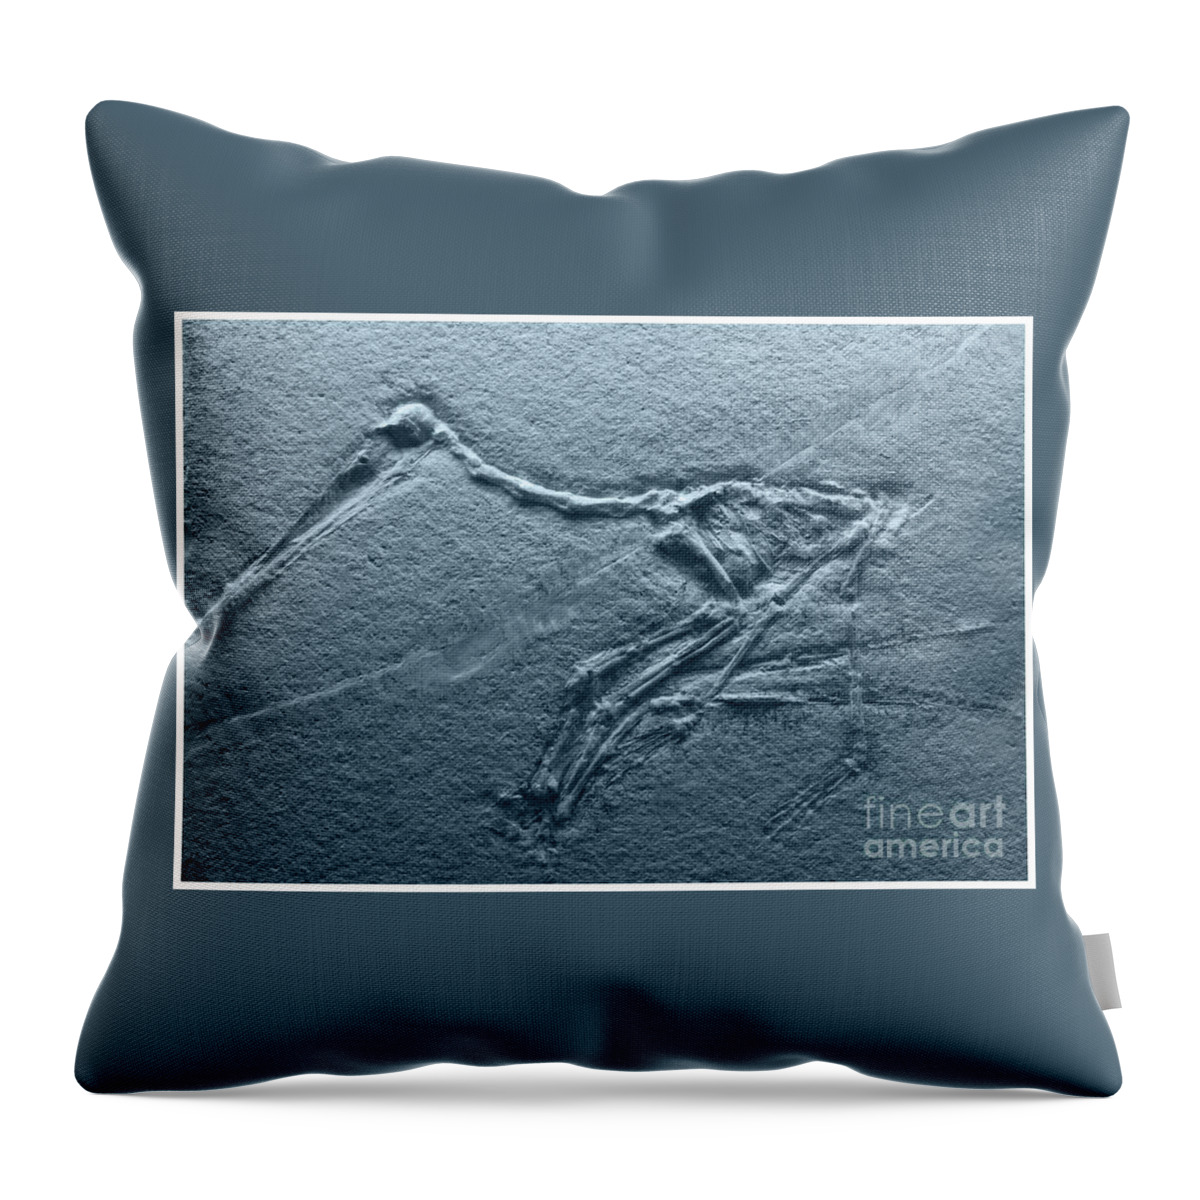 Jurassic Throw Pillow featuring the photograph Fossils - Pterosaurs by Heiko Koehrer-Wagner